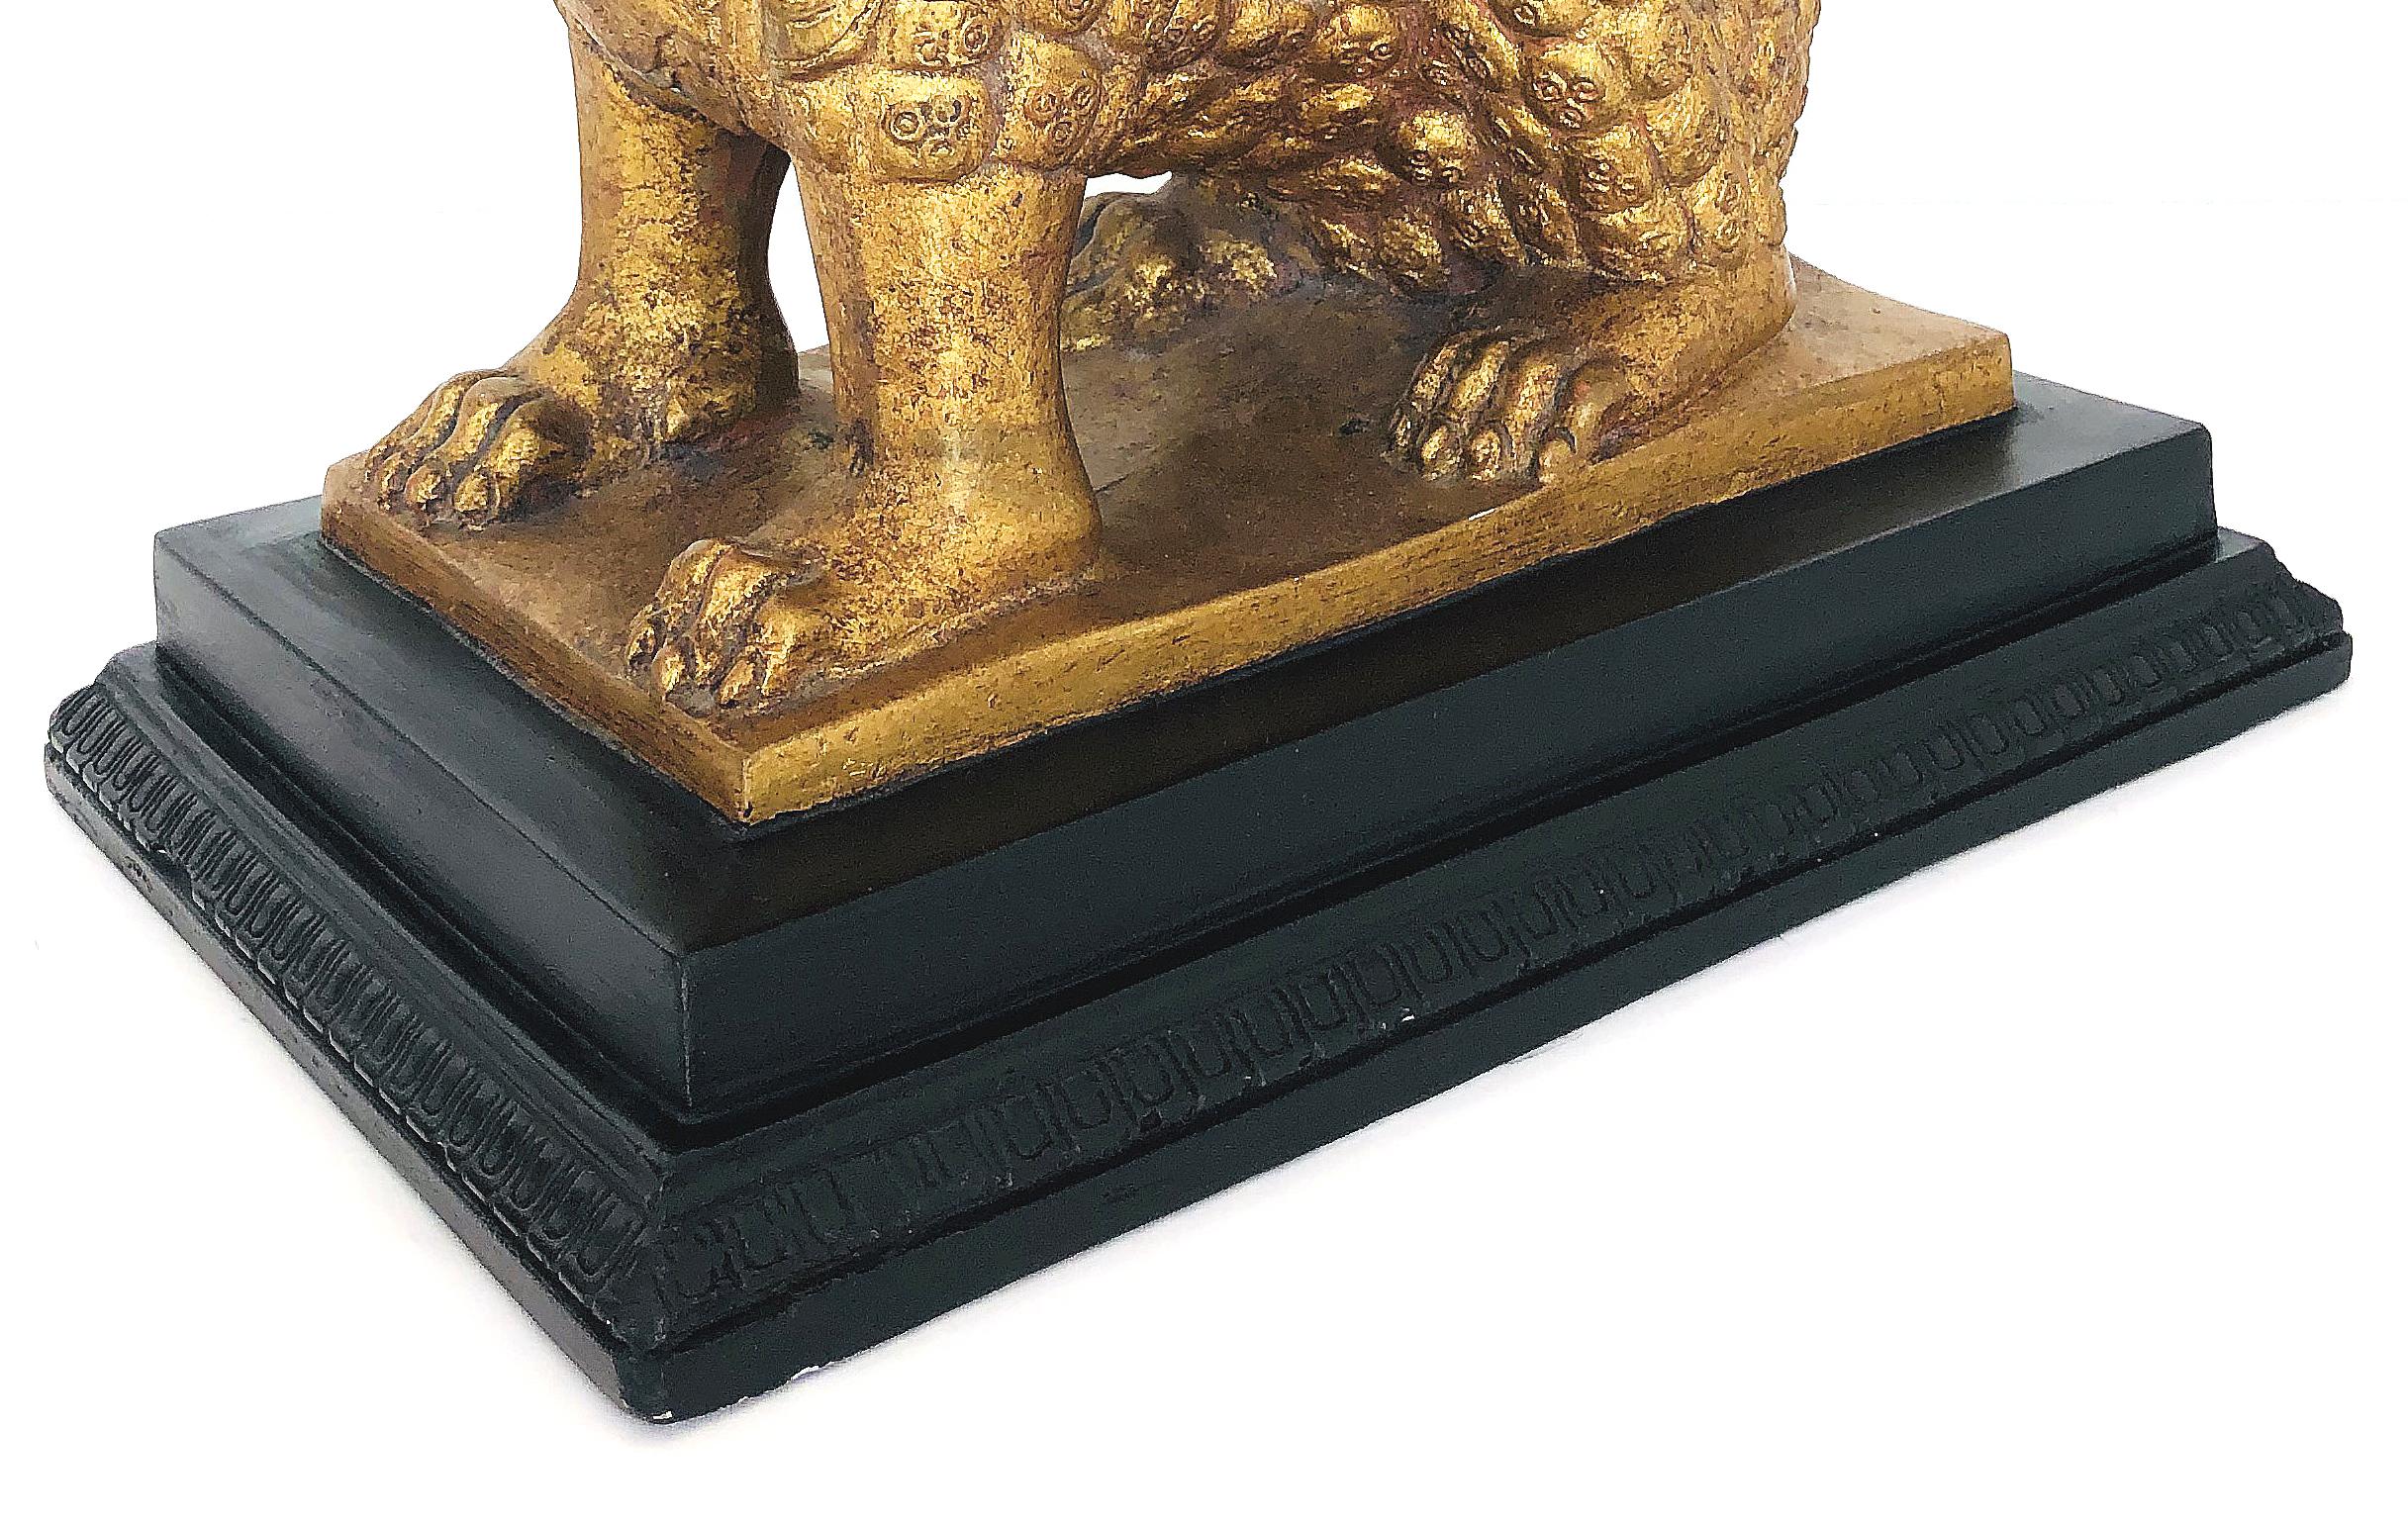 Wood 1950s Gilt Pottery Foo Dog Lamp, after Tony Duquette